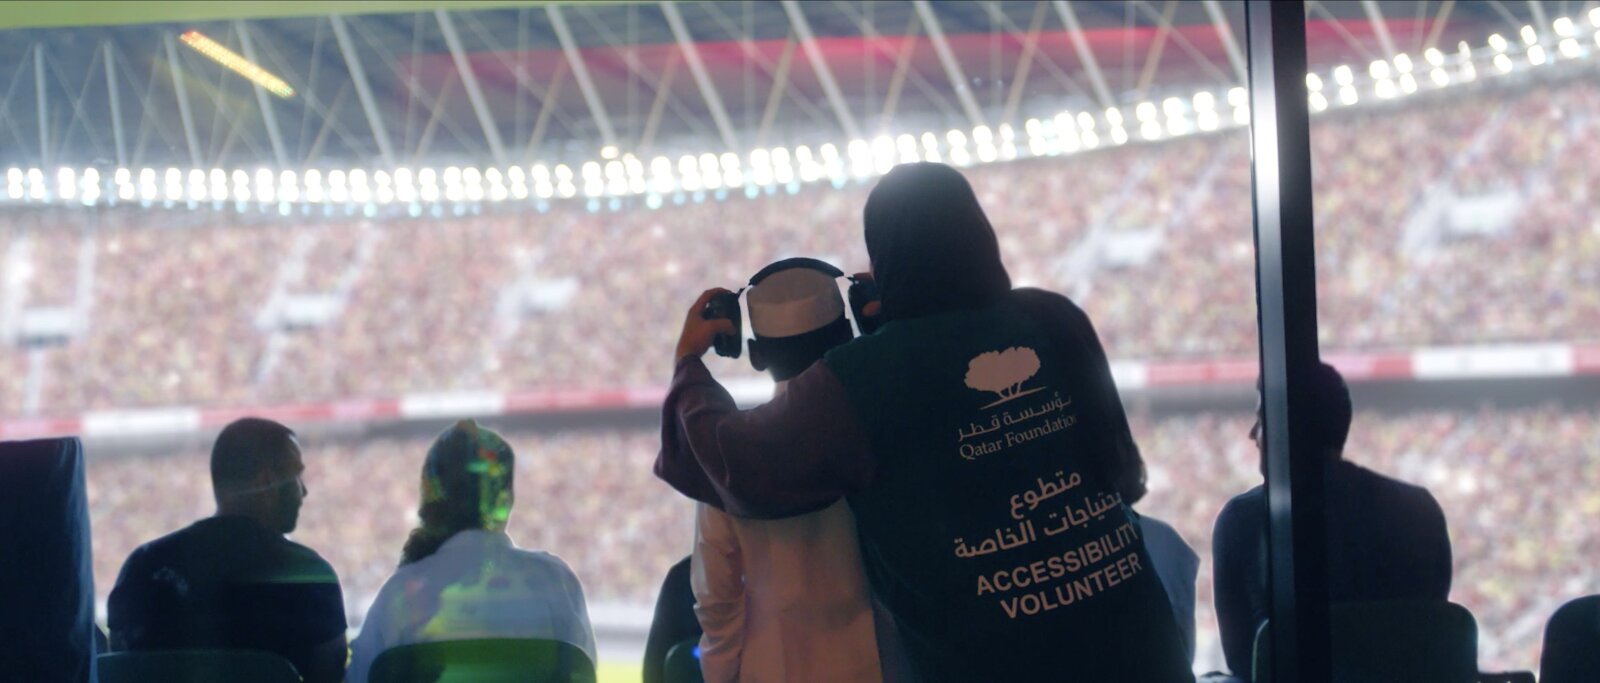 A World Cup for all: Qatar Foundation’s accessibility guide